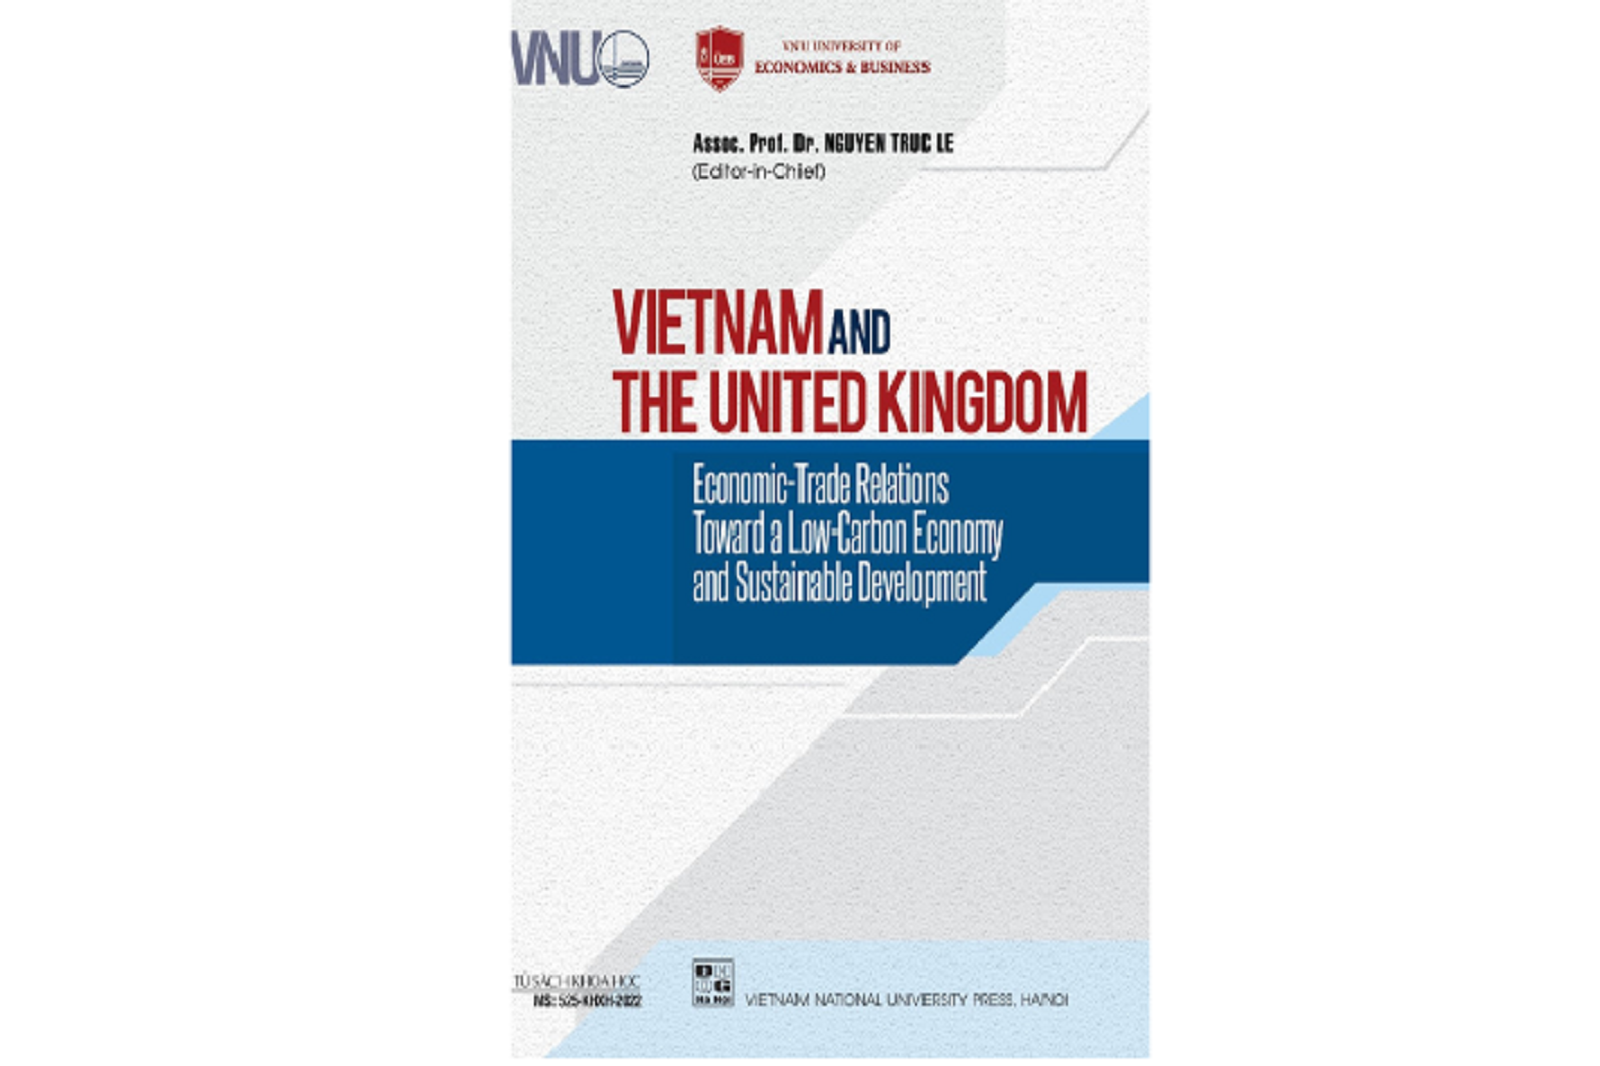 Vietnam and the United Kingdom: Economic-trade Relations toward a Low-carbon Economy and Sustainable Development